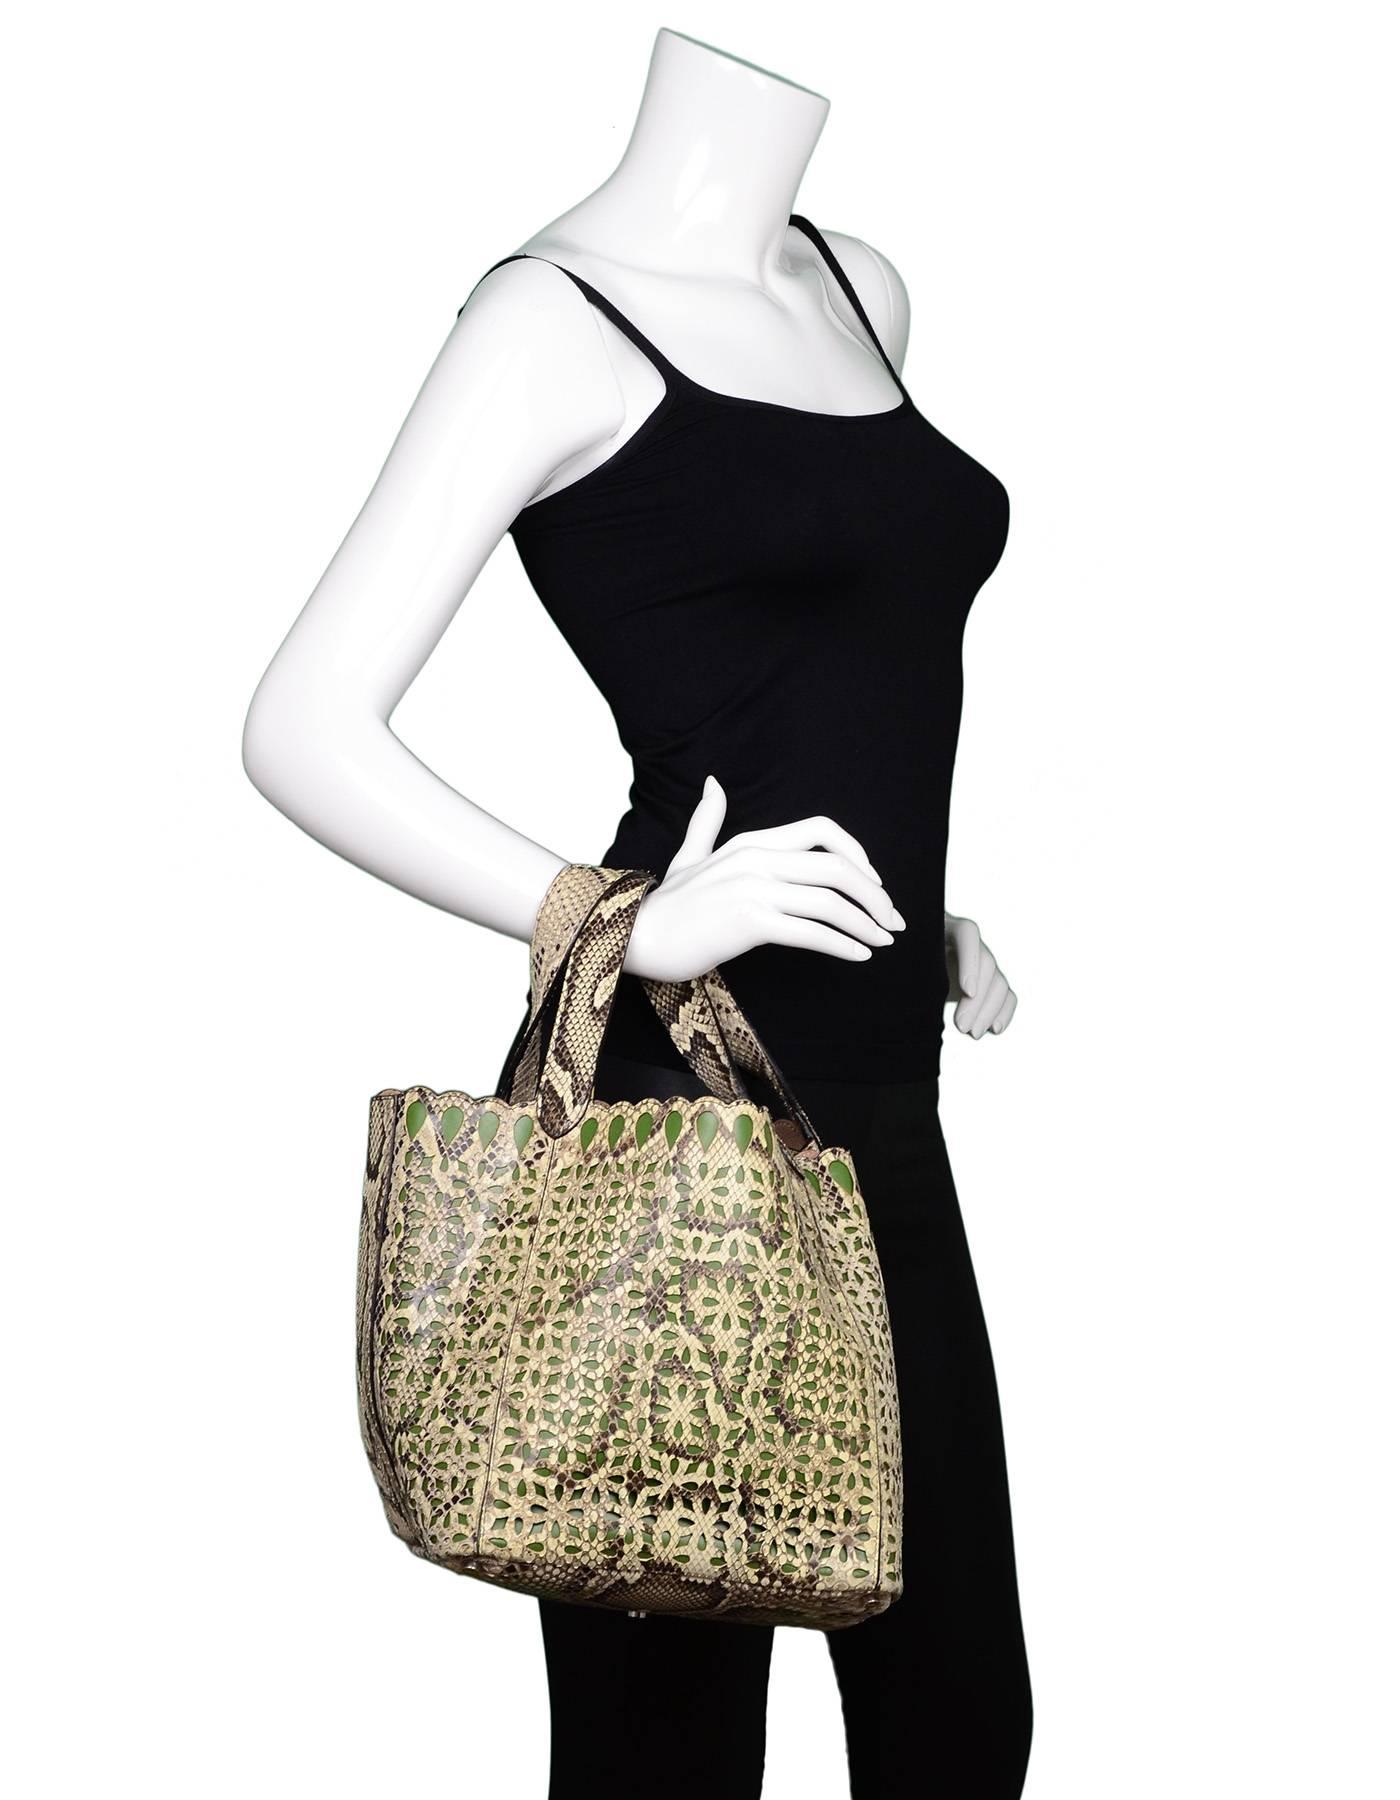 Alaia Beige & Green Python Laser-Cut Tote

Made In: Italy
Color: Beige, green
Hardware: Silvertone
Materials: Python, leather
Lining: Nude leather
Closure/opening: Open top
Exterior Pockets: None
Interior Pockets: None

Retail Price: $3,500